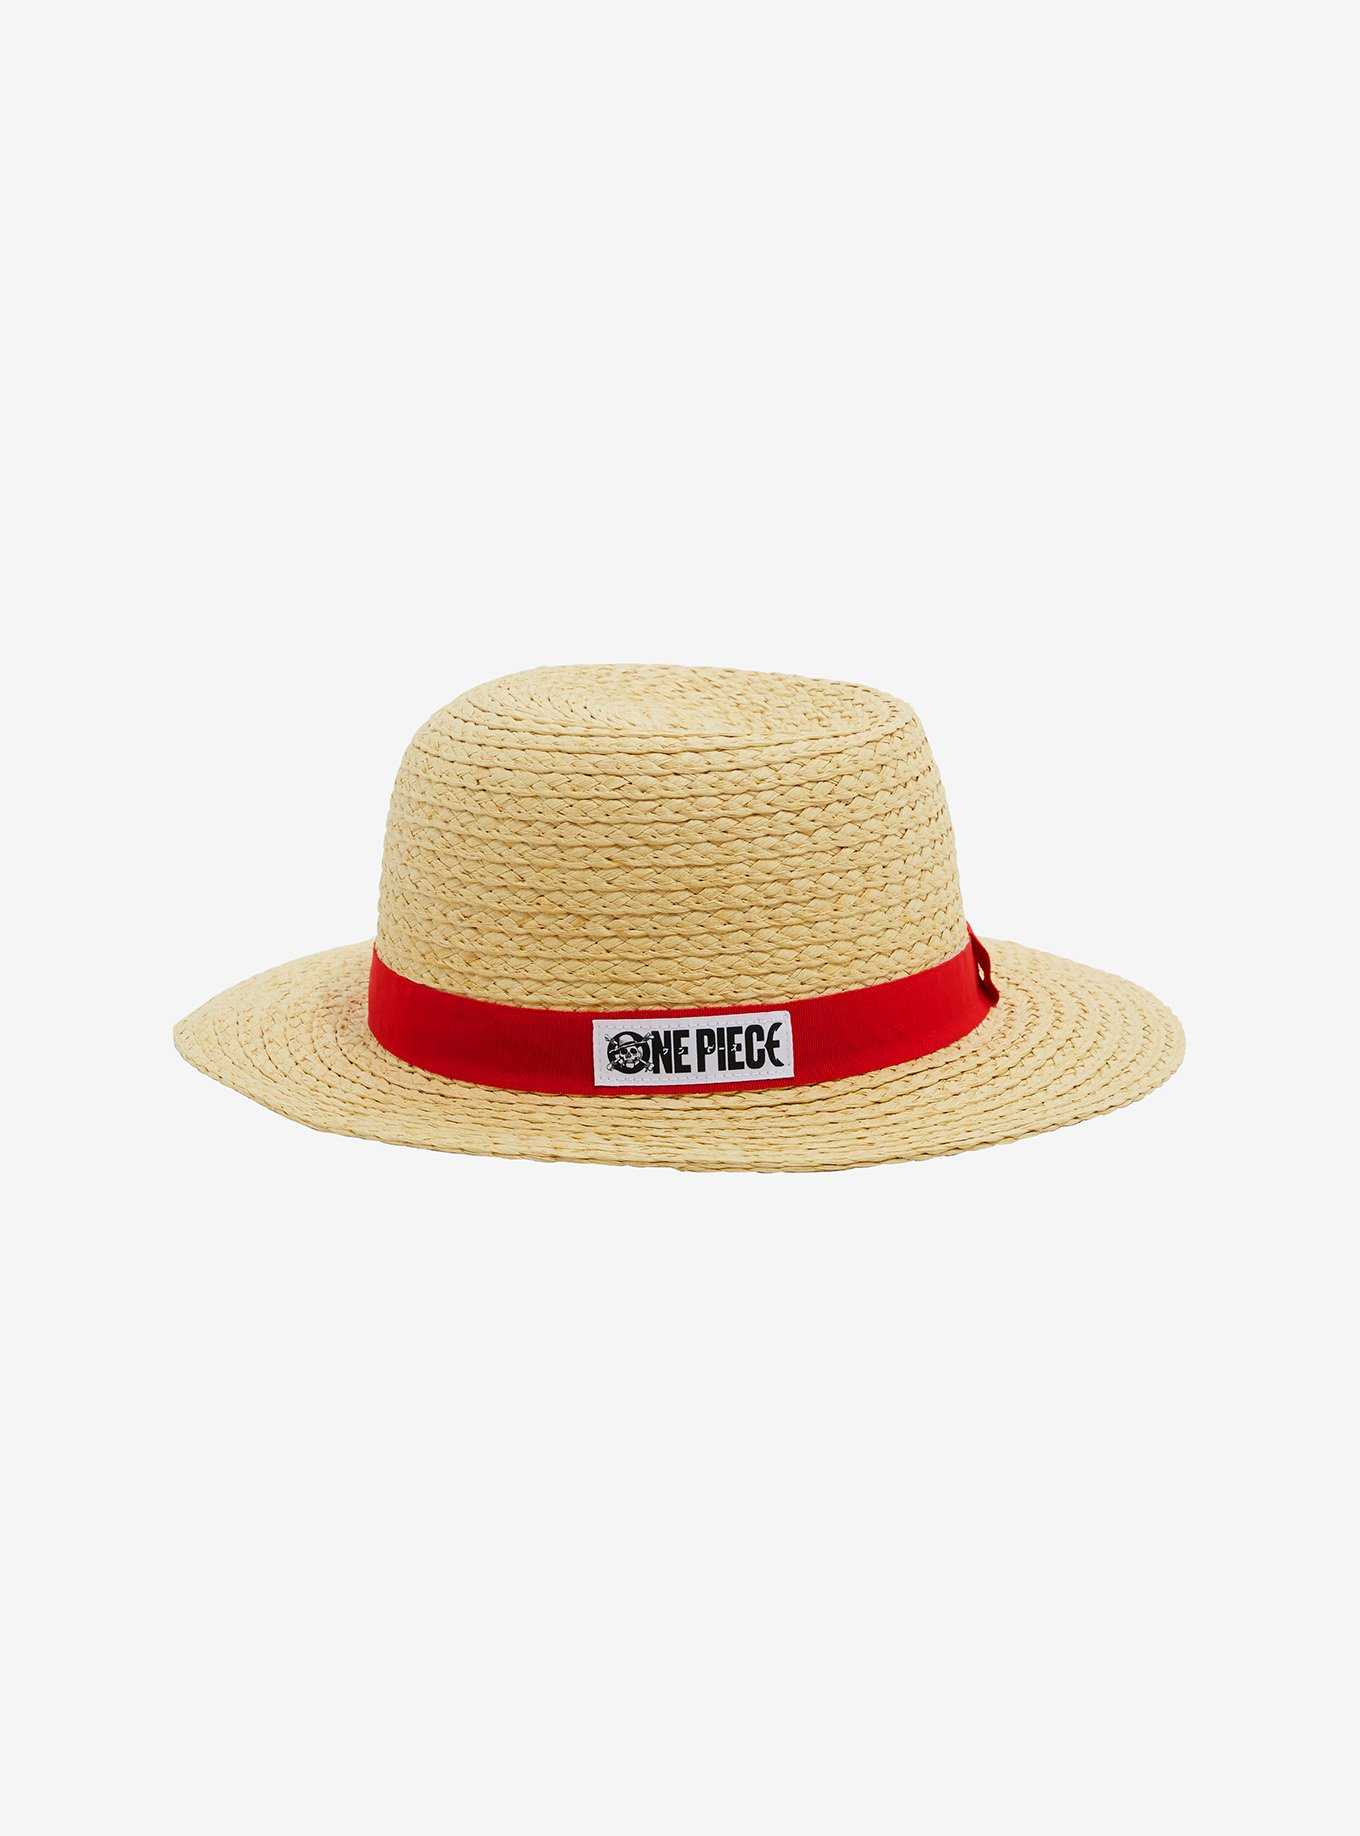 One Piece Luffy Live Action Straw Hat, , hi-res